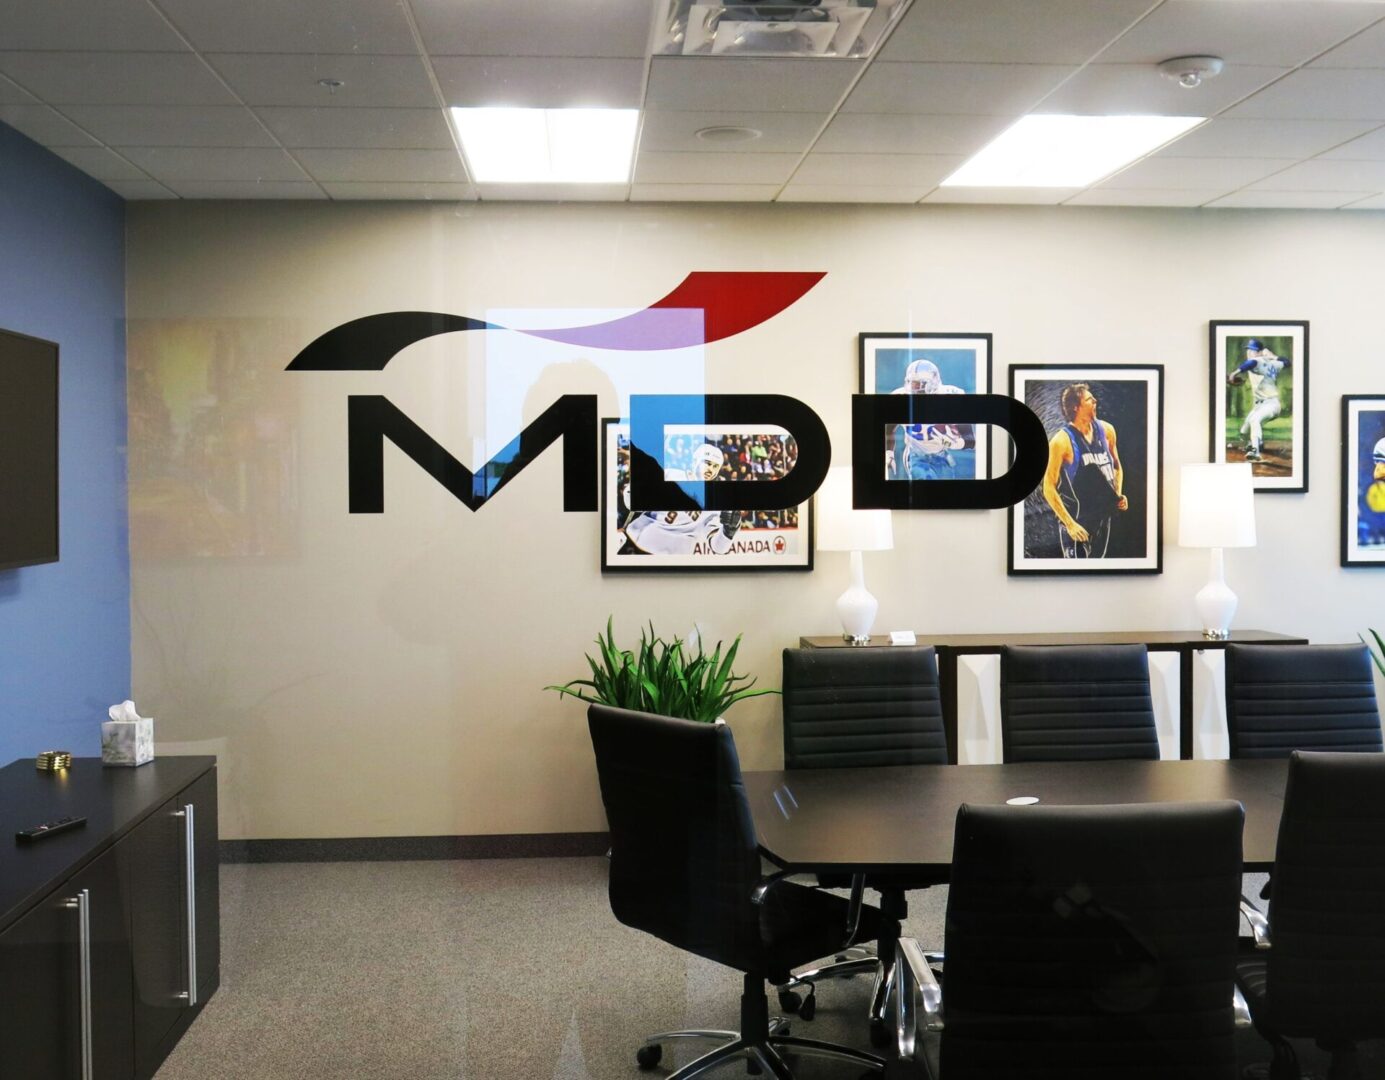 An office waiting area with a company logo on a glass partition, decorated with framed photographs on the wall.